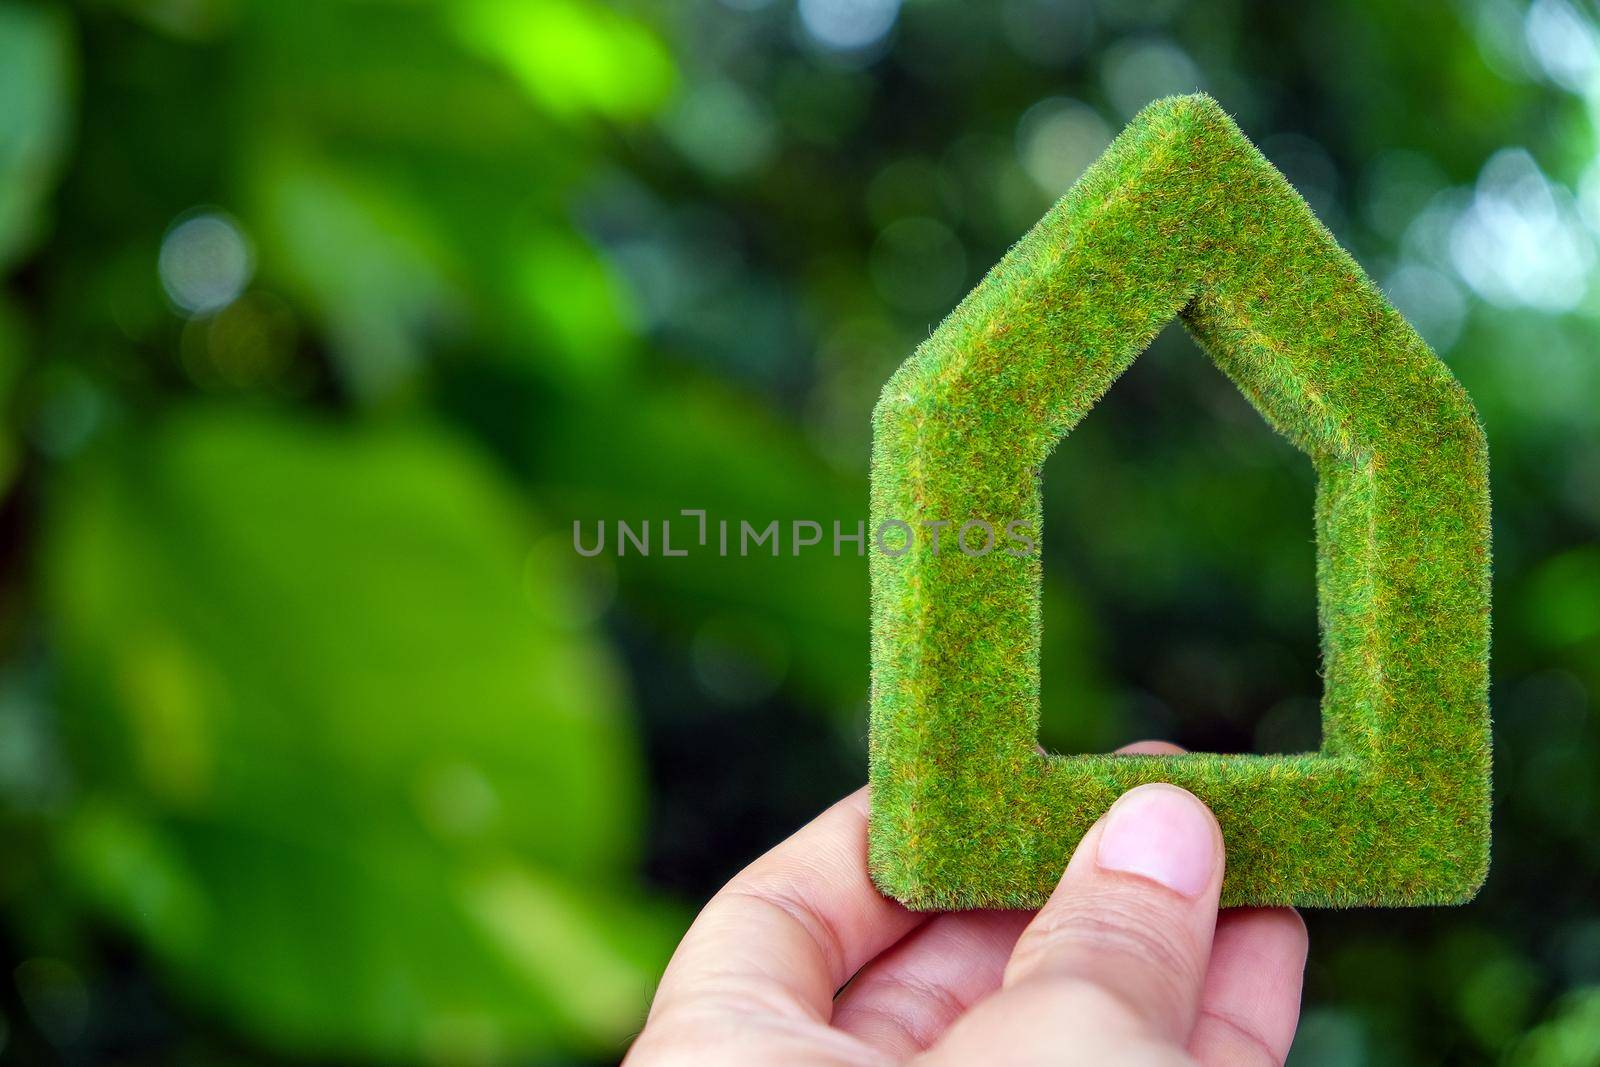 Green house icon concept, Hand holding green house icon